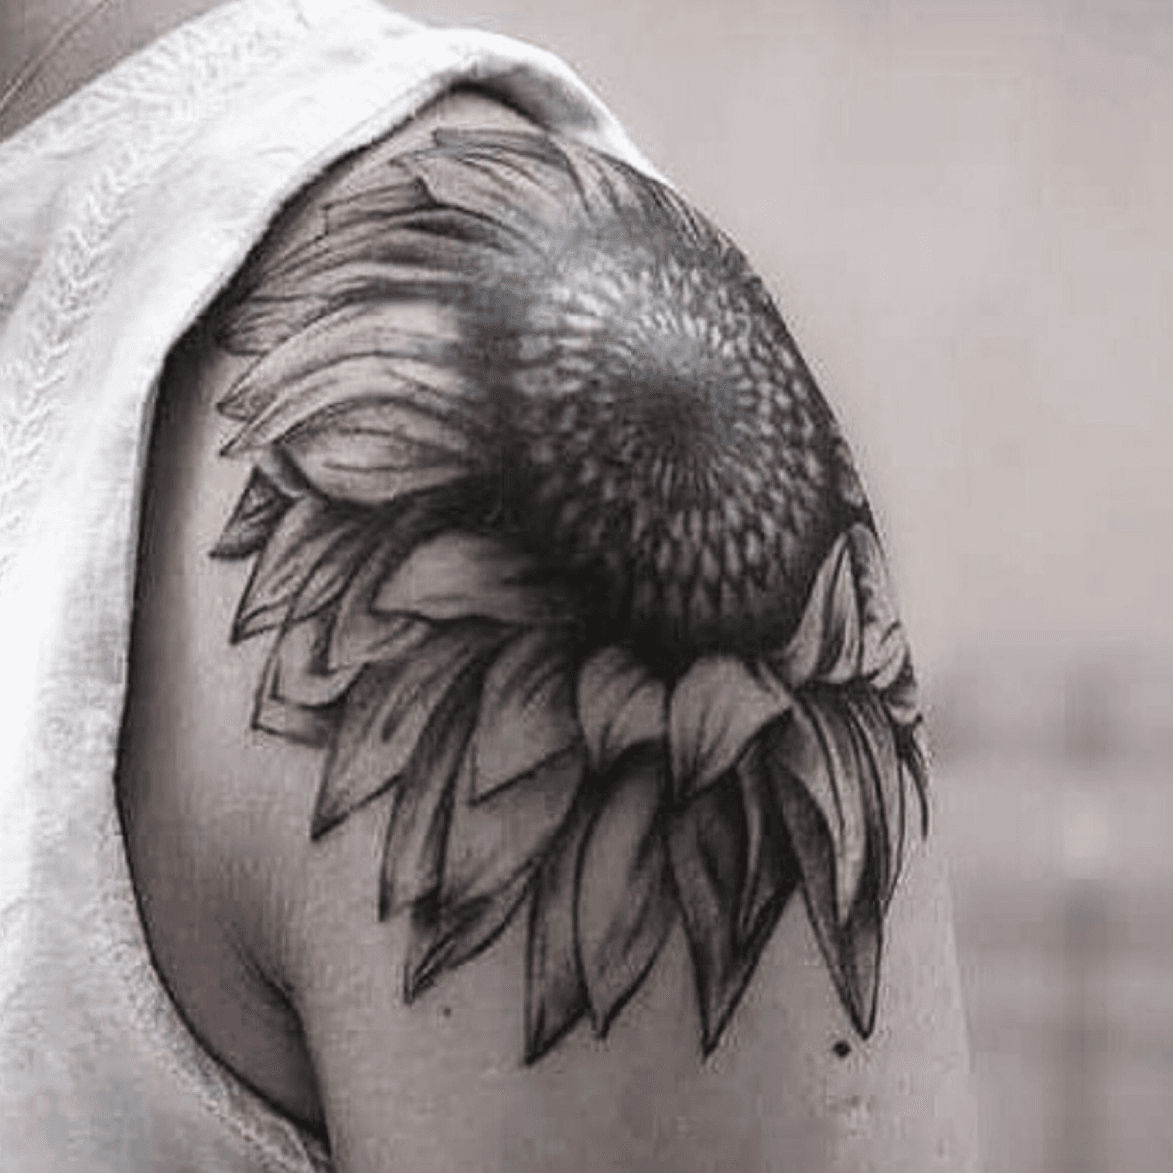 60 Best Sunflower Tattoos to Inspire You in 2023